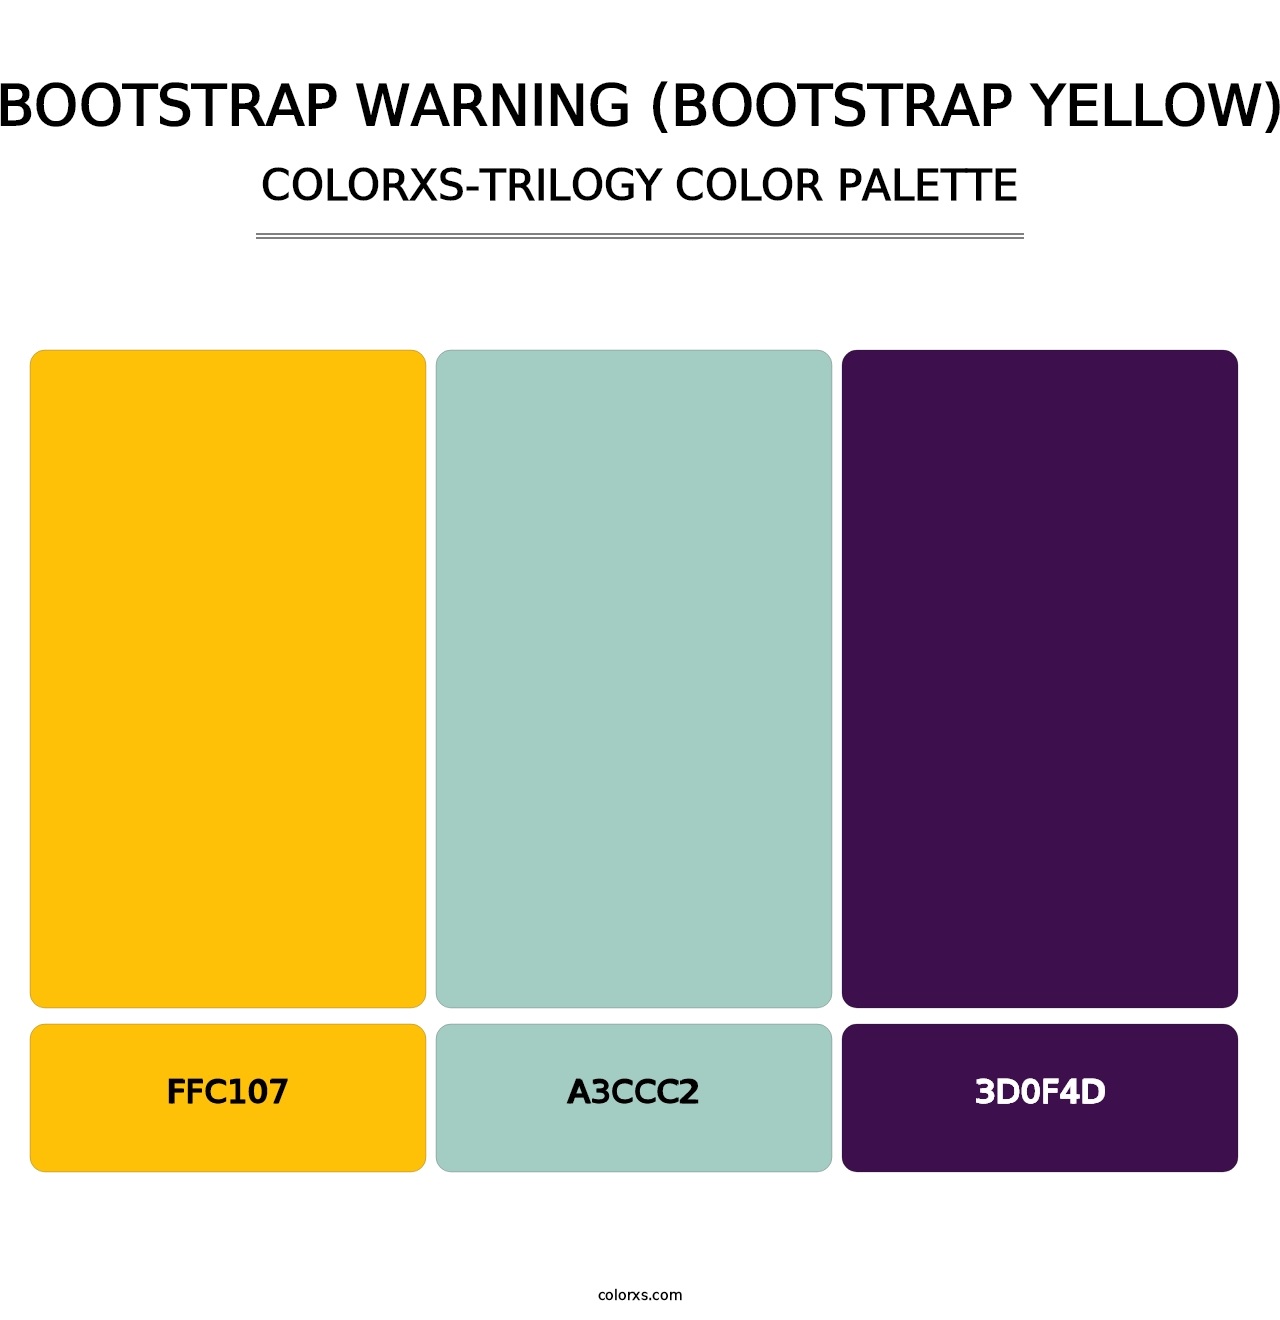 Bootstrap Warning (Bootstrap Yellow) - Colorxs Trilogy Palette